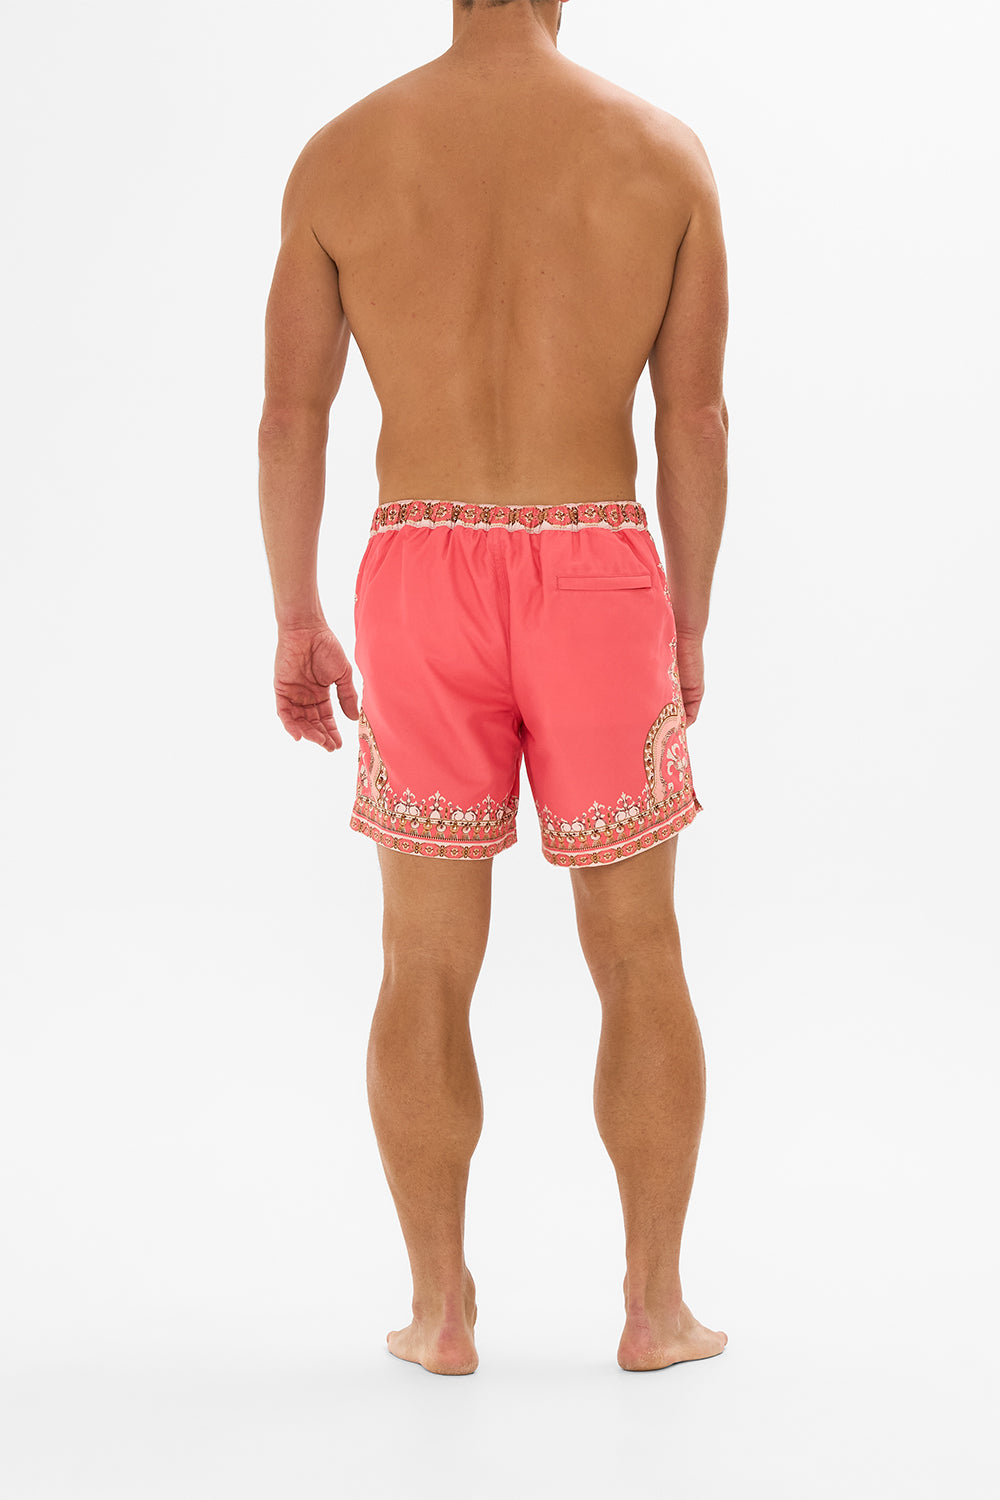 CAMILLA pink tailored swim short in Shell Games